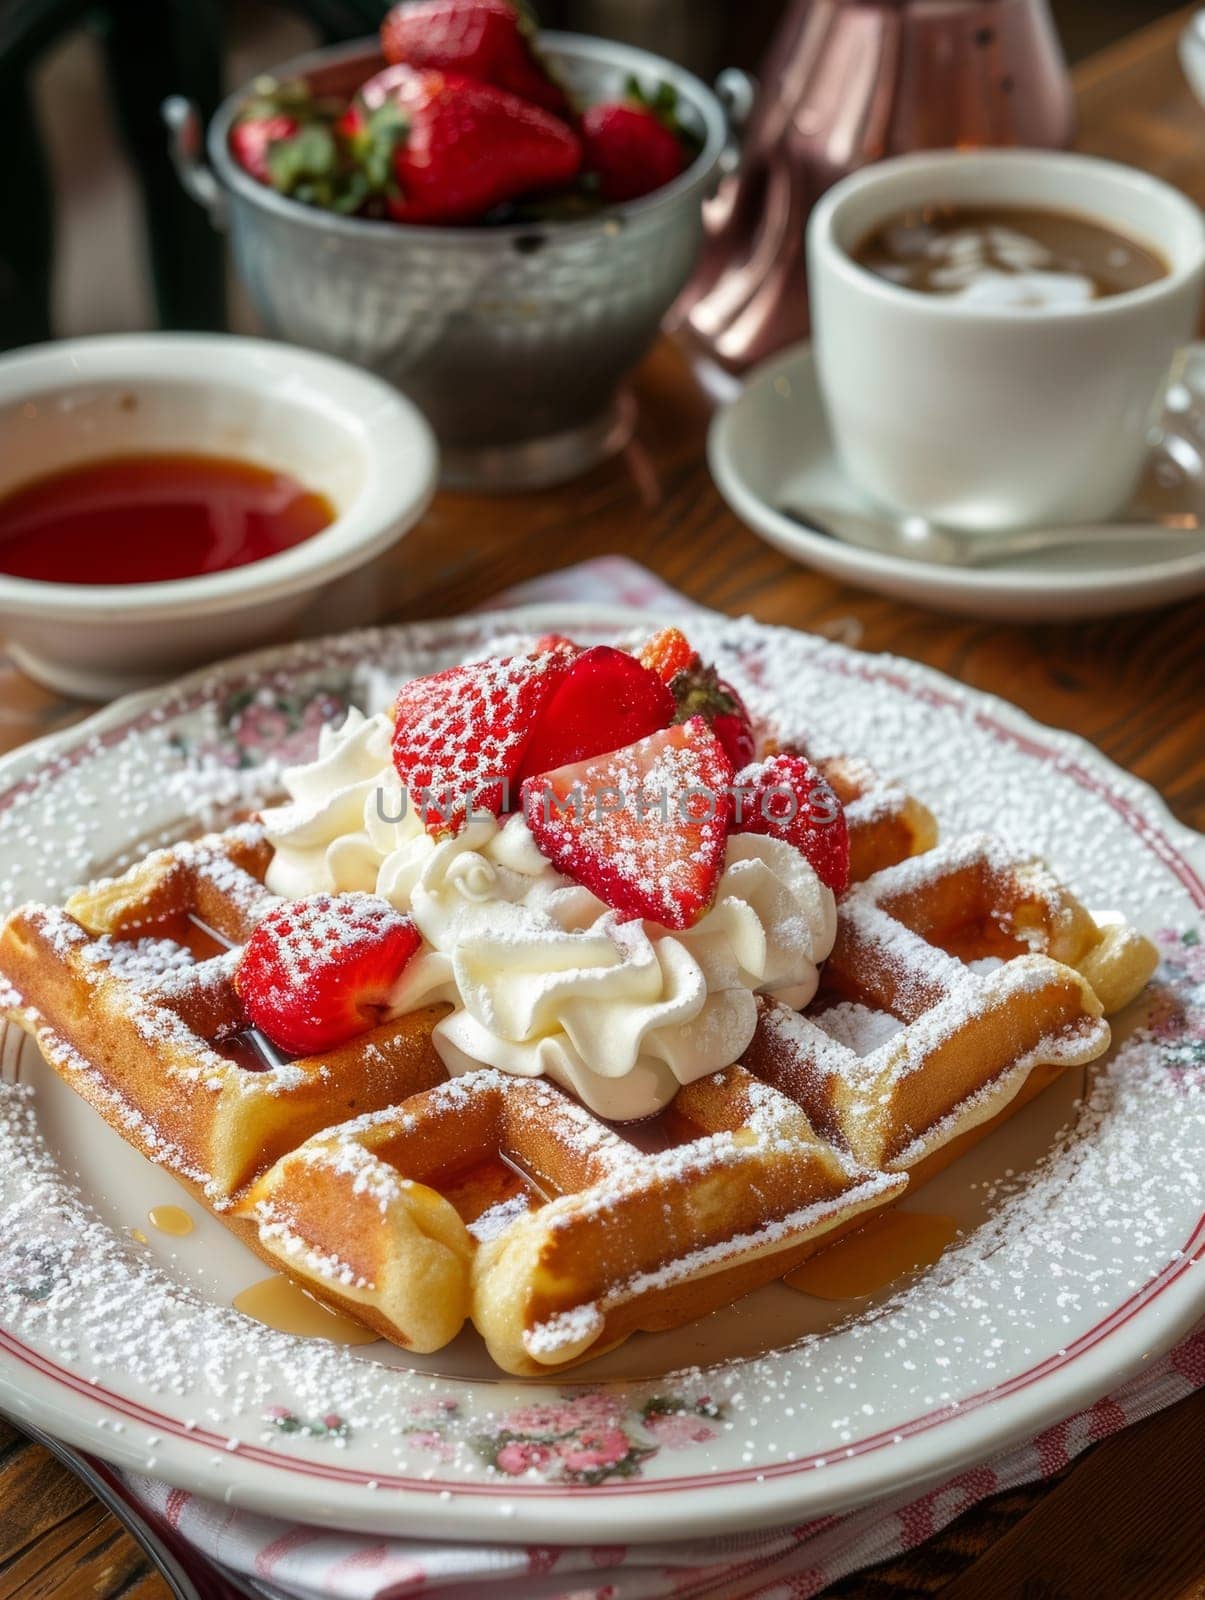 Delicate Belgian waffles served on a fine china plate, adorned with fresh strawberries and a generous dollop of whipped cream - a decadent and gourmet breakfast or dessert presentation. by sfinks